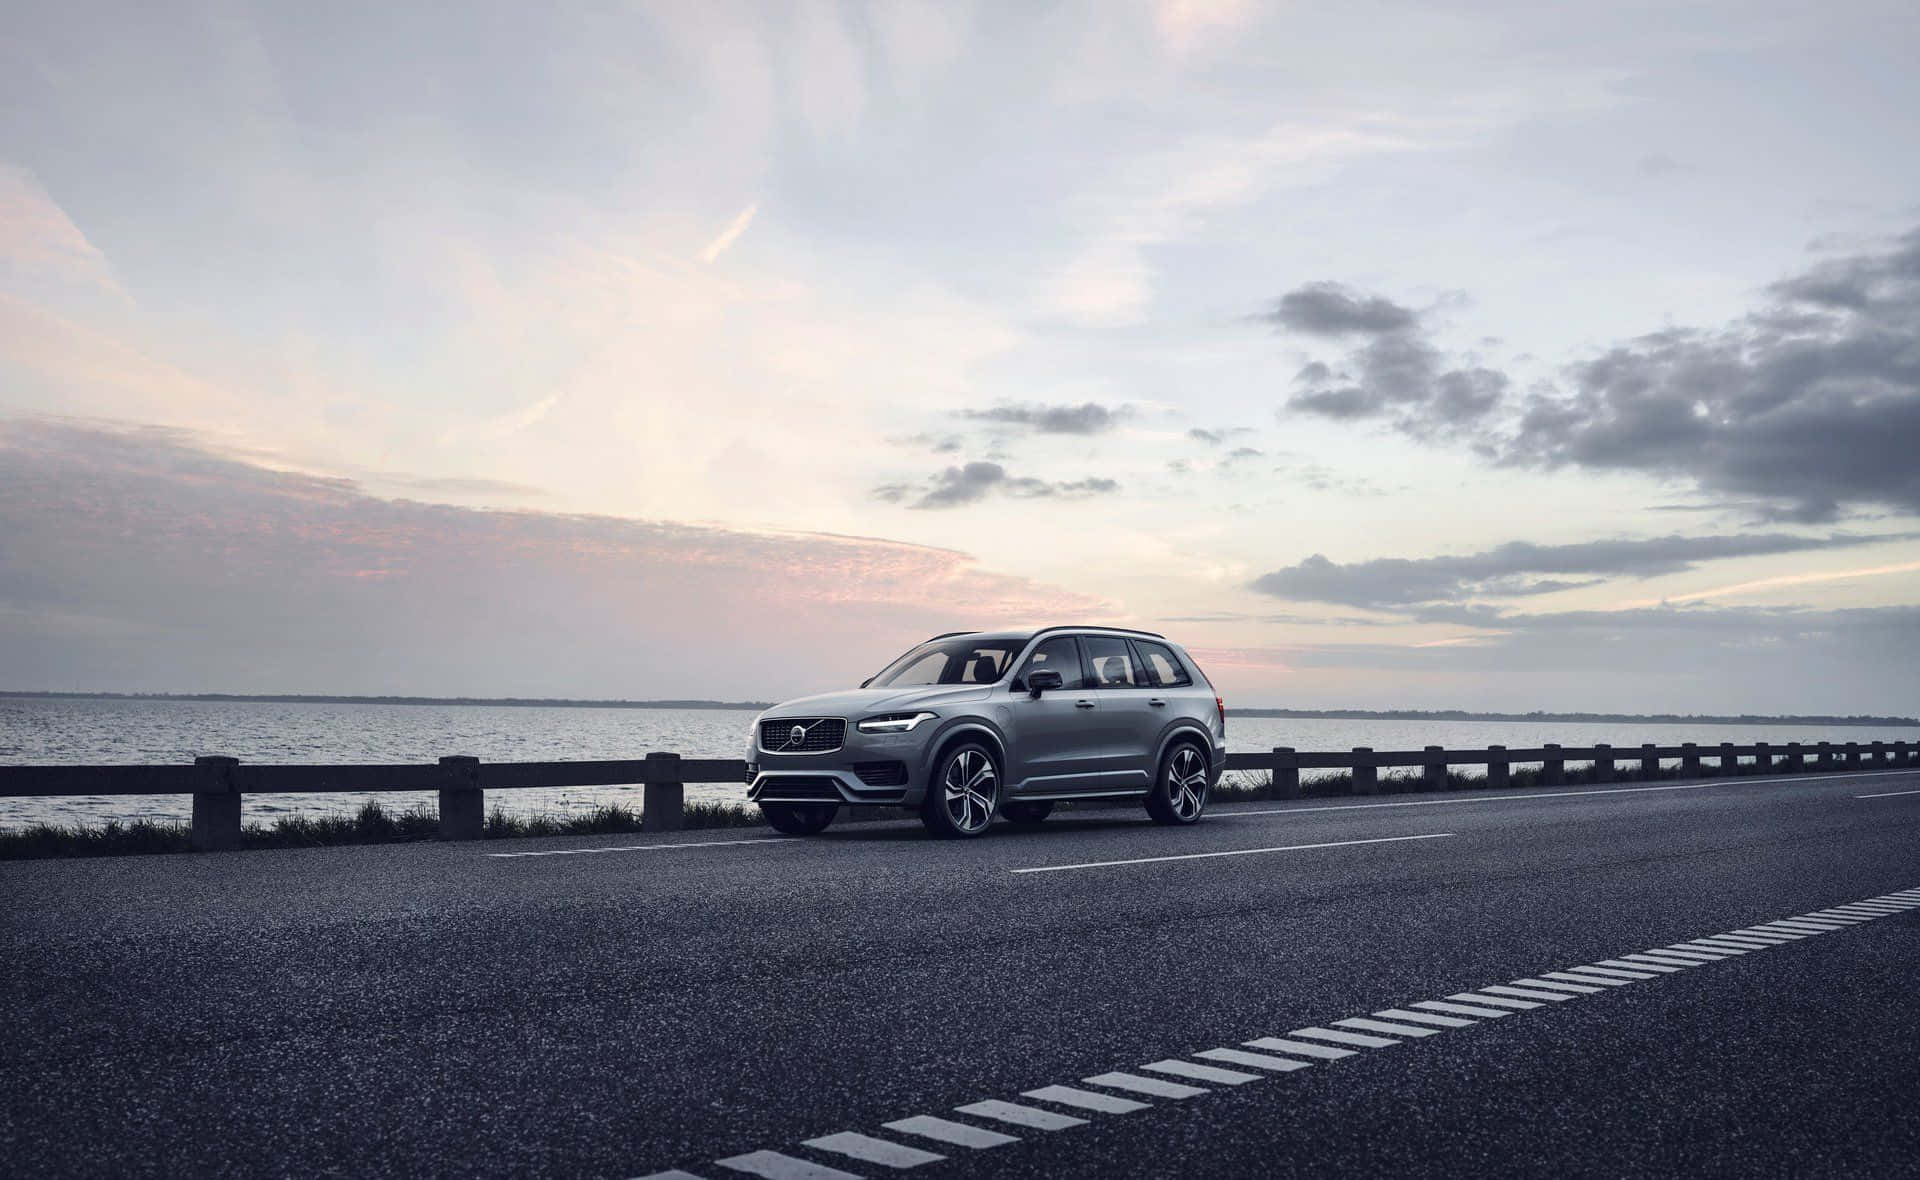 Volvo Xc90 In Tropical Sunset Wallpaper